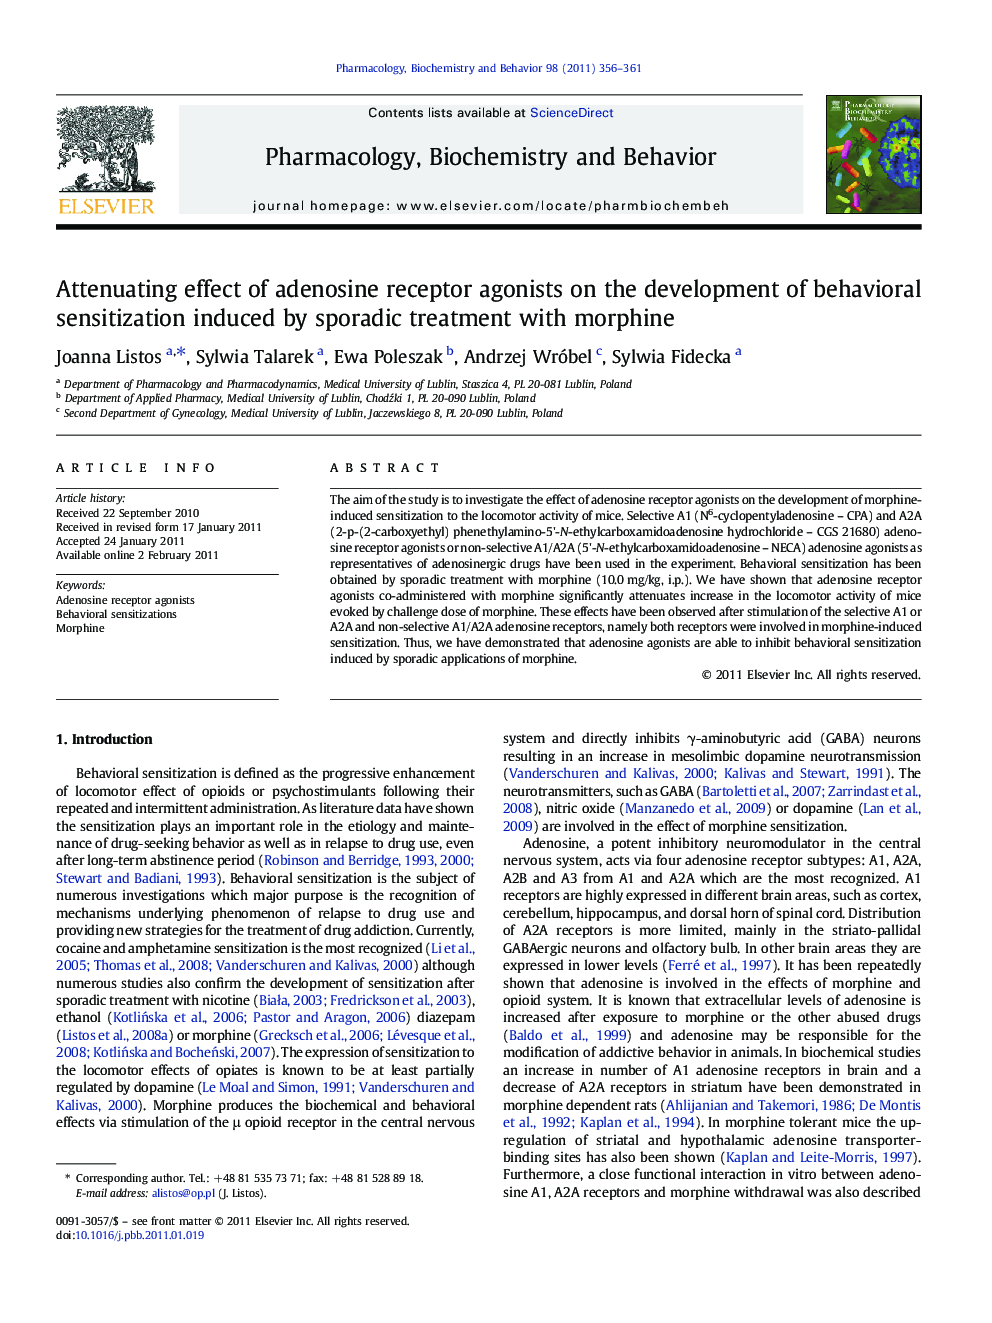 Attenuating effect of adenosine receptor agonists on the development of behavioral sensitization induced by sporadic treatment with morphine